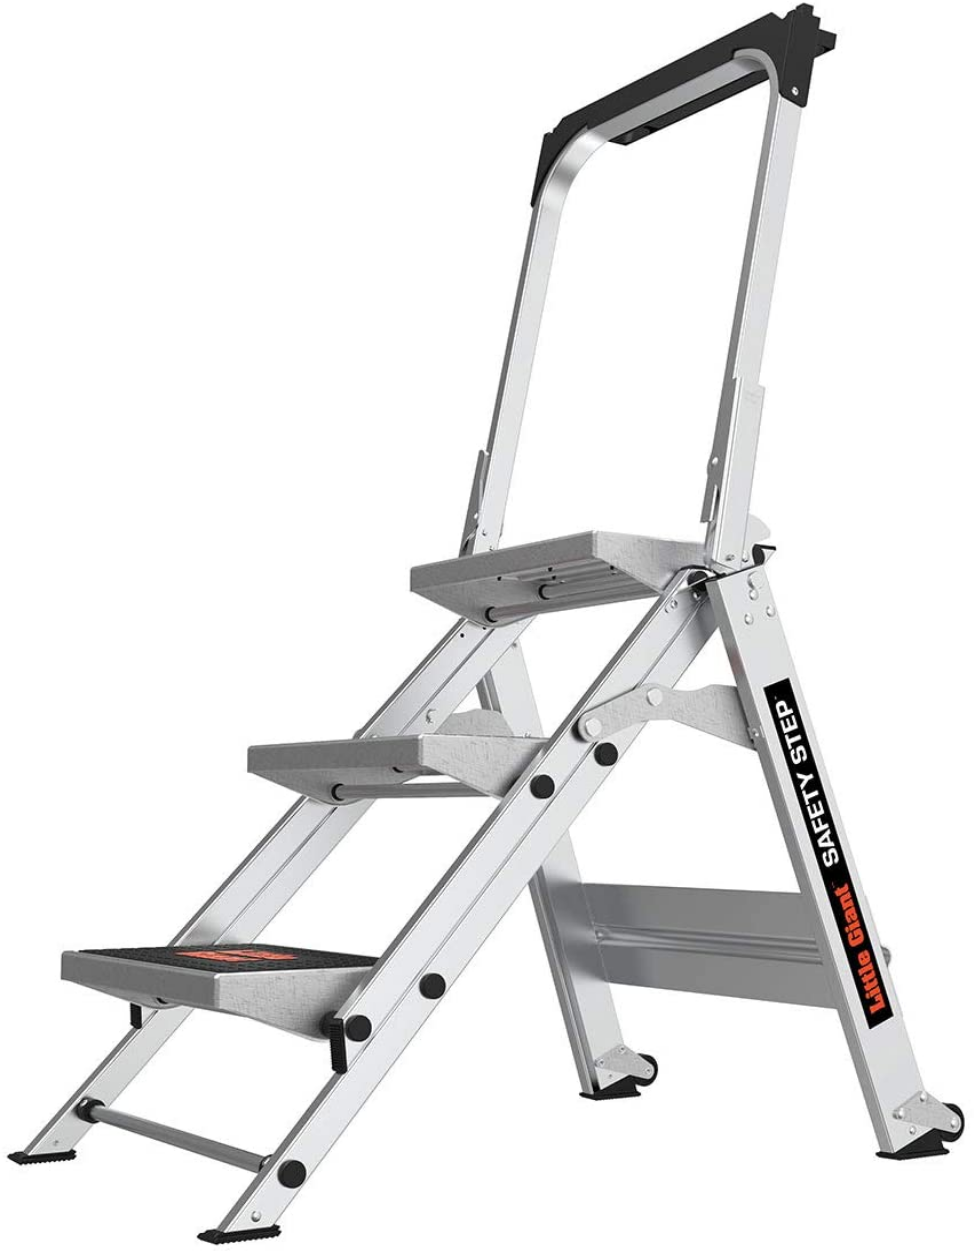 Screenshot_2020-12-29 AmazonSmile Little Giant Ladders, Safety Step, 3 Step, 2 Foot, Step Stool, Aluminum, Type 1A, 300 lbs[...].png